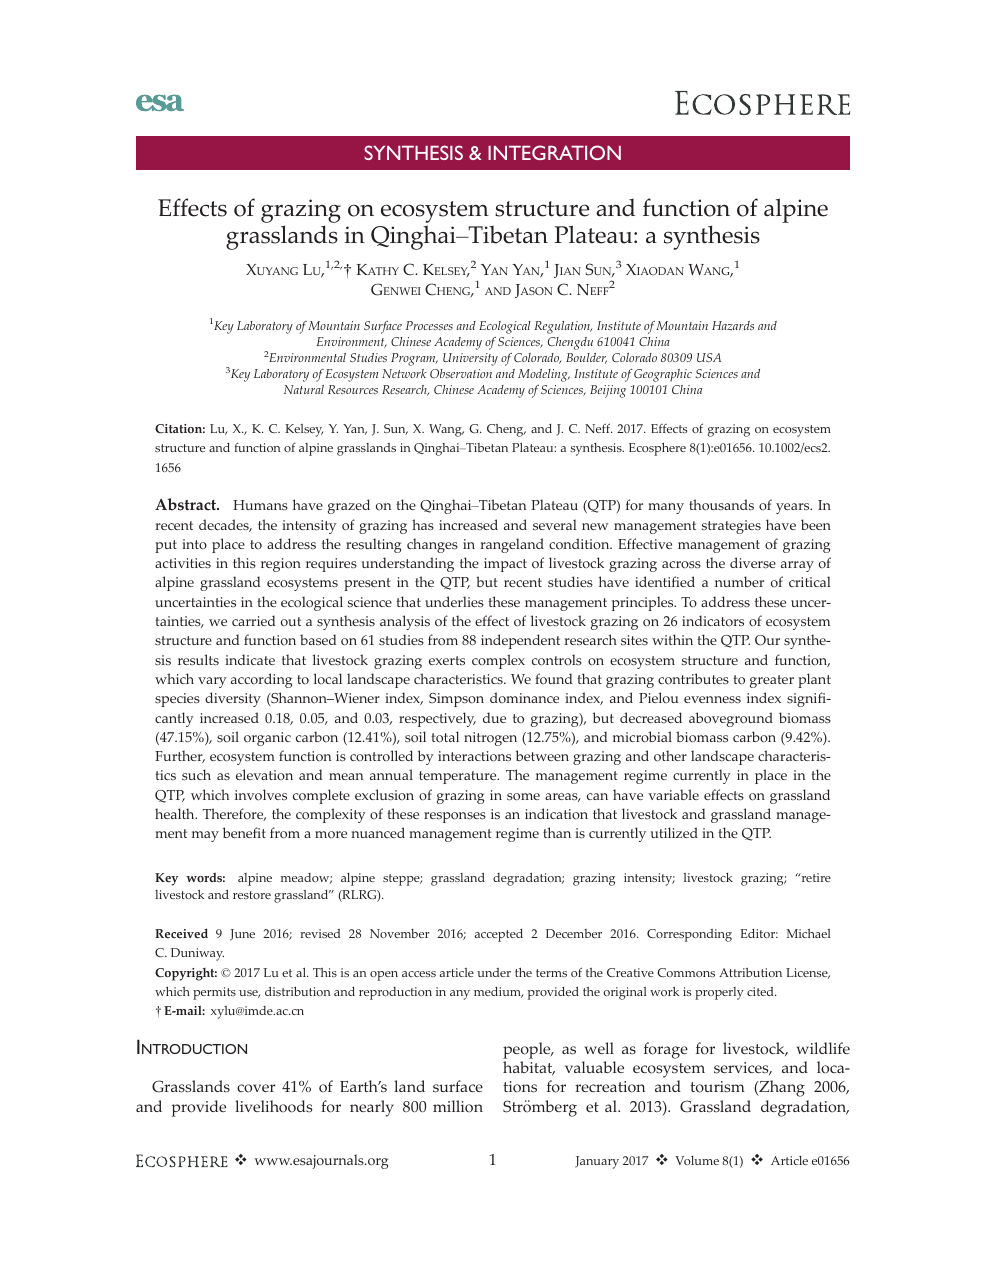 Effects Of Grazing On Ecosystem Structure And Function Of Alpine Grasslands In Qinghai Tibetan Plateau A Synthesis Topic Of Research Paper In Biological Sciences Download Scholarly Article Pdf And Read For Free